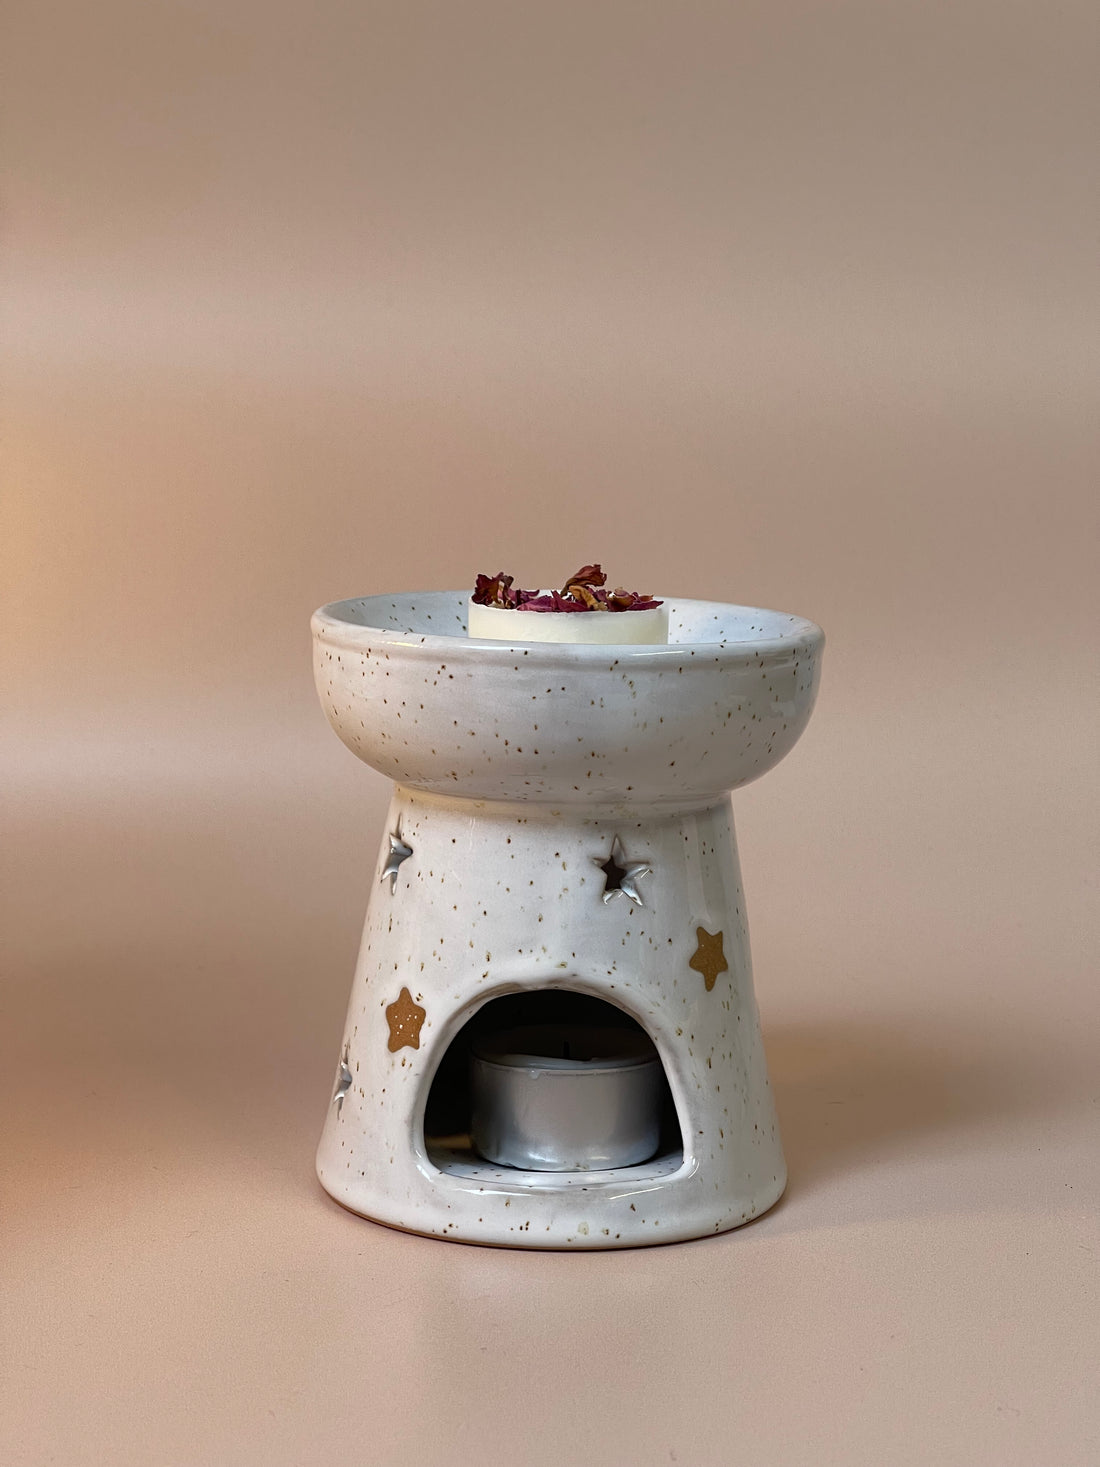 Starry-themed wax melt burner featuring a celestial design, perfect for melting wax melts and infusing your space with luxury fragrances.